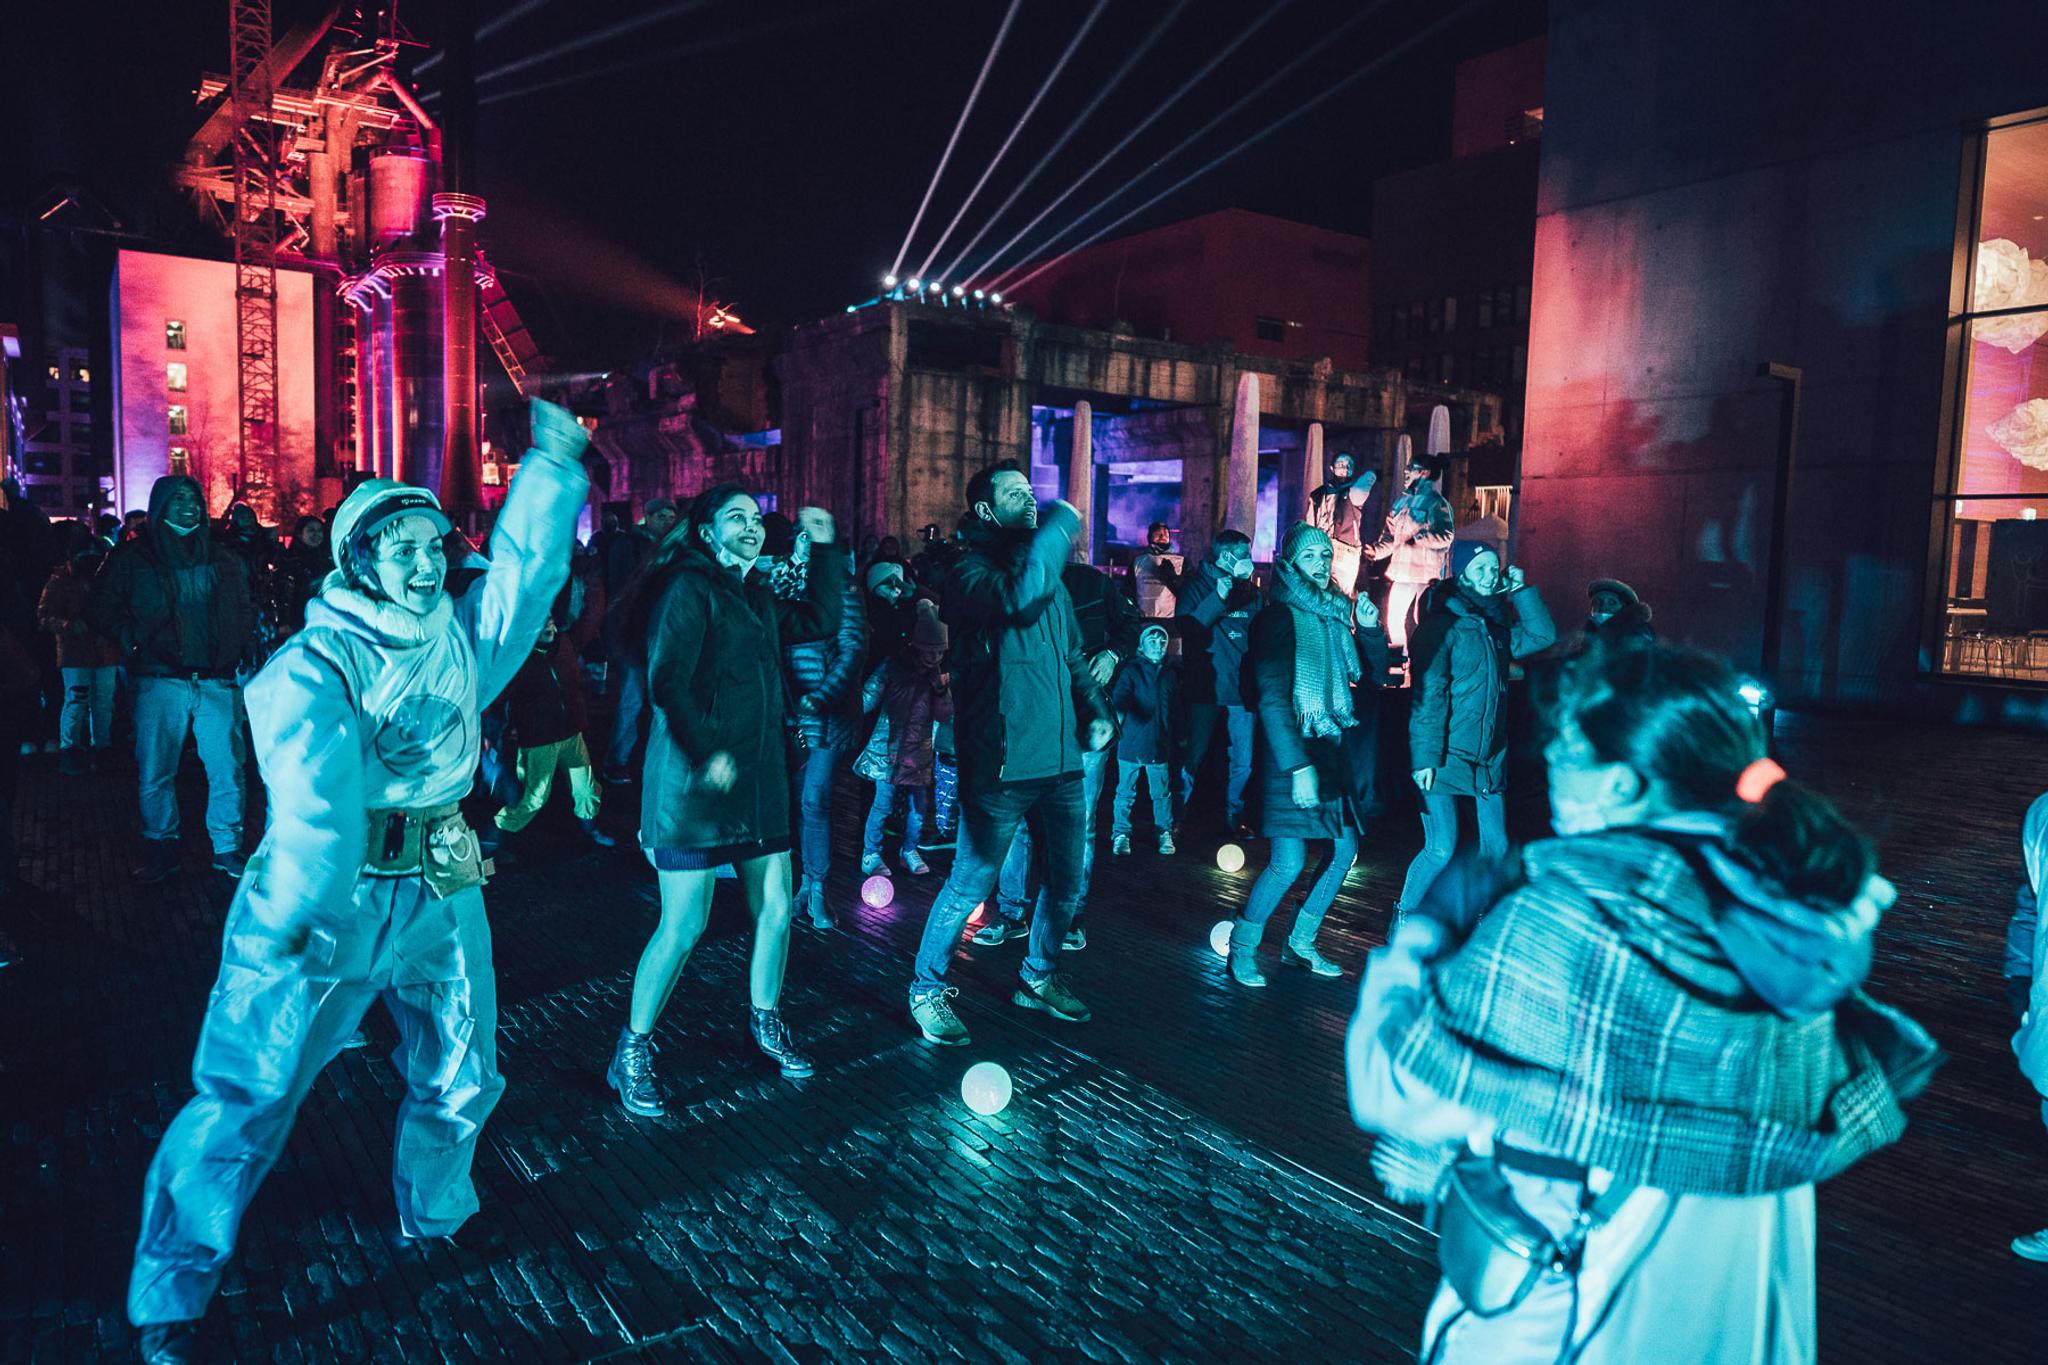 A group of people lit in blue light wearing winter coats imitate the movements of a woman in a puffy full body suit. They all raise their right arms up and we see they are in movement.